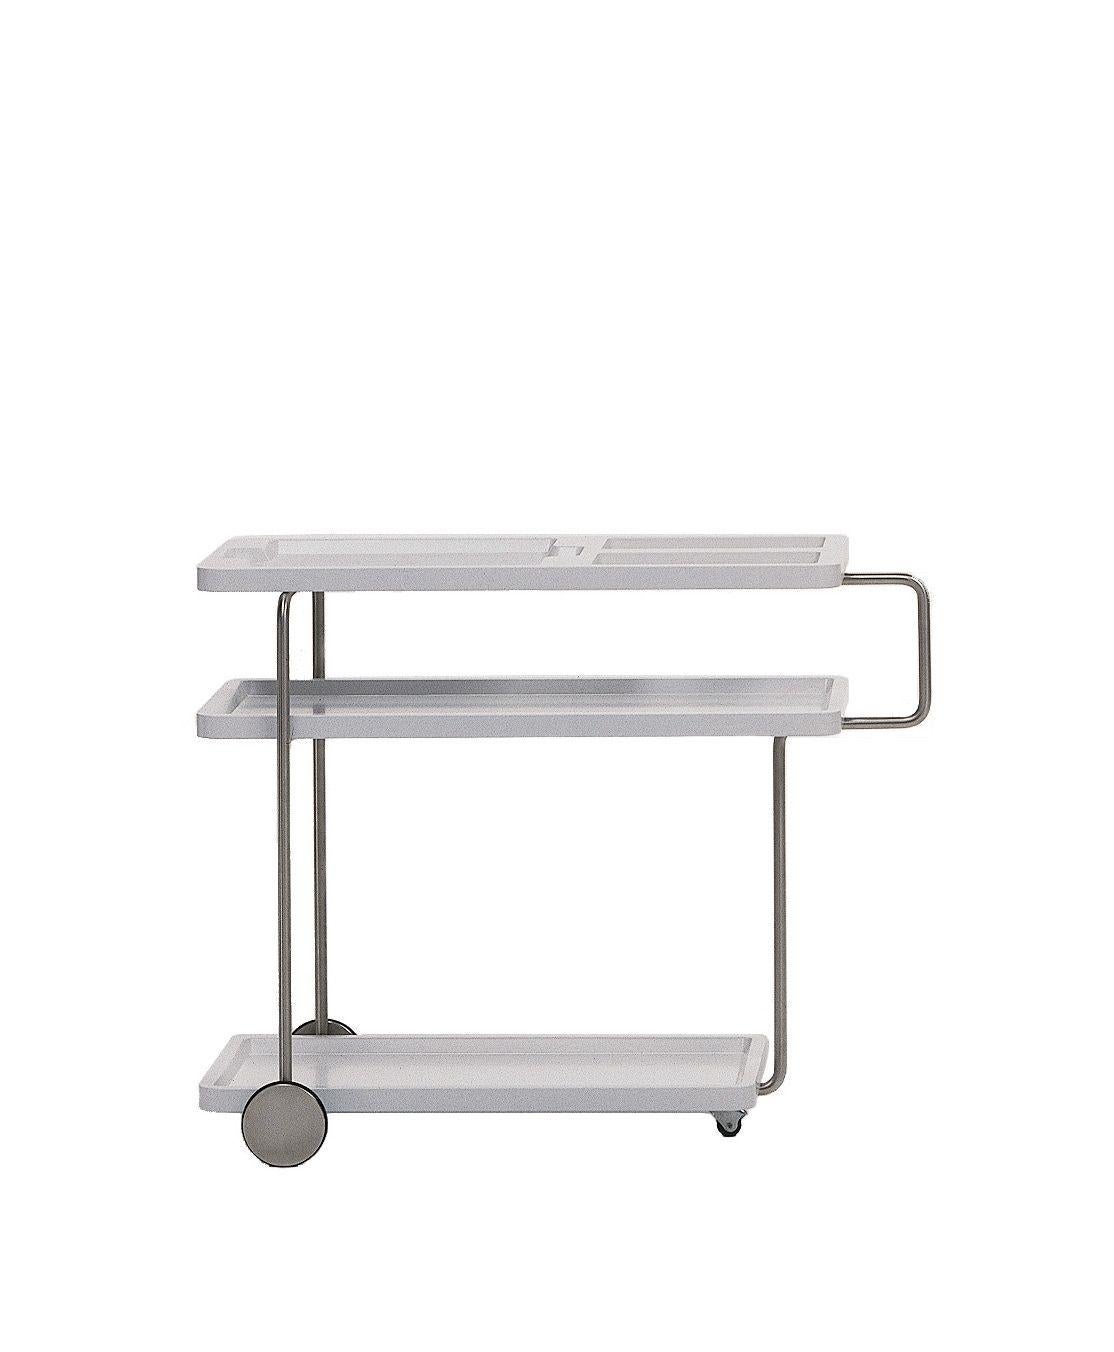 White Happy Hour trolley by Alfredo Häberli
Dimensions: D 43 x W 91 x H 73 cm 
Materials: Chromed iron structure. Heat-shaped ABS+PMMA plastic trays, available painted with polyurethane micro-textured in matt white RAL 9003 or black RAL 9005. Back